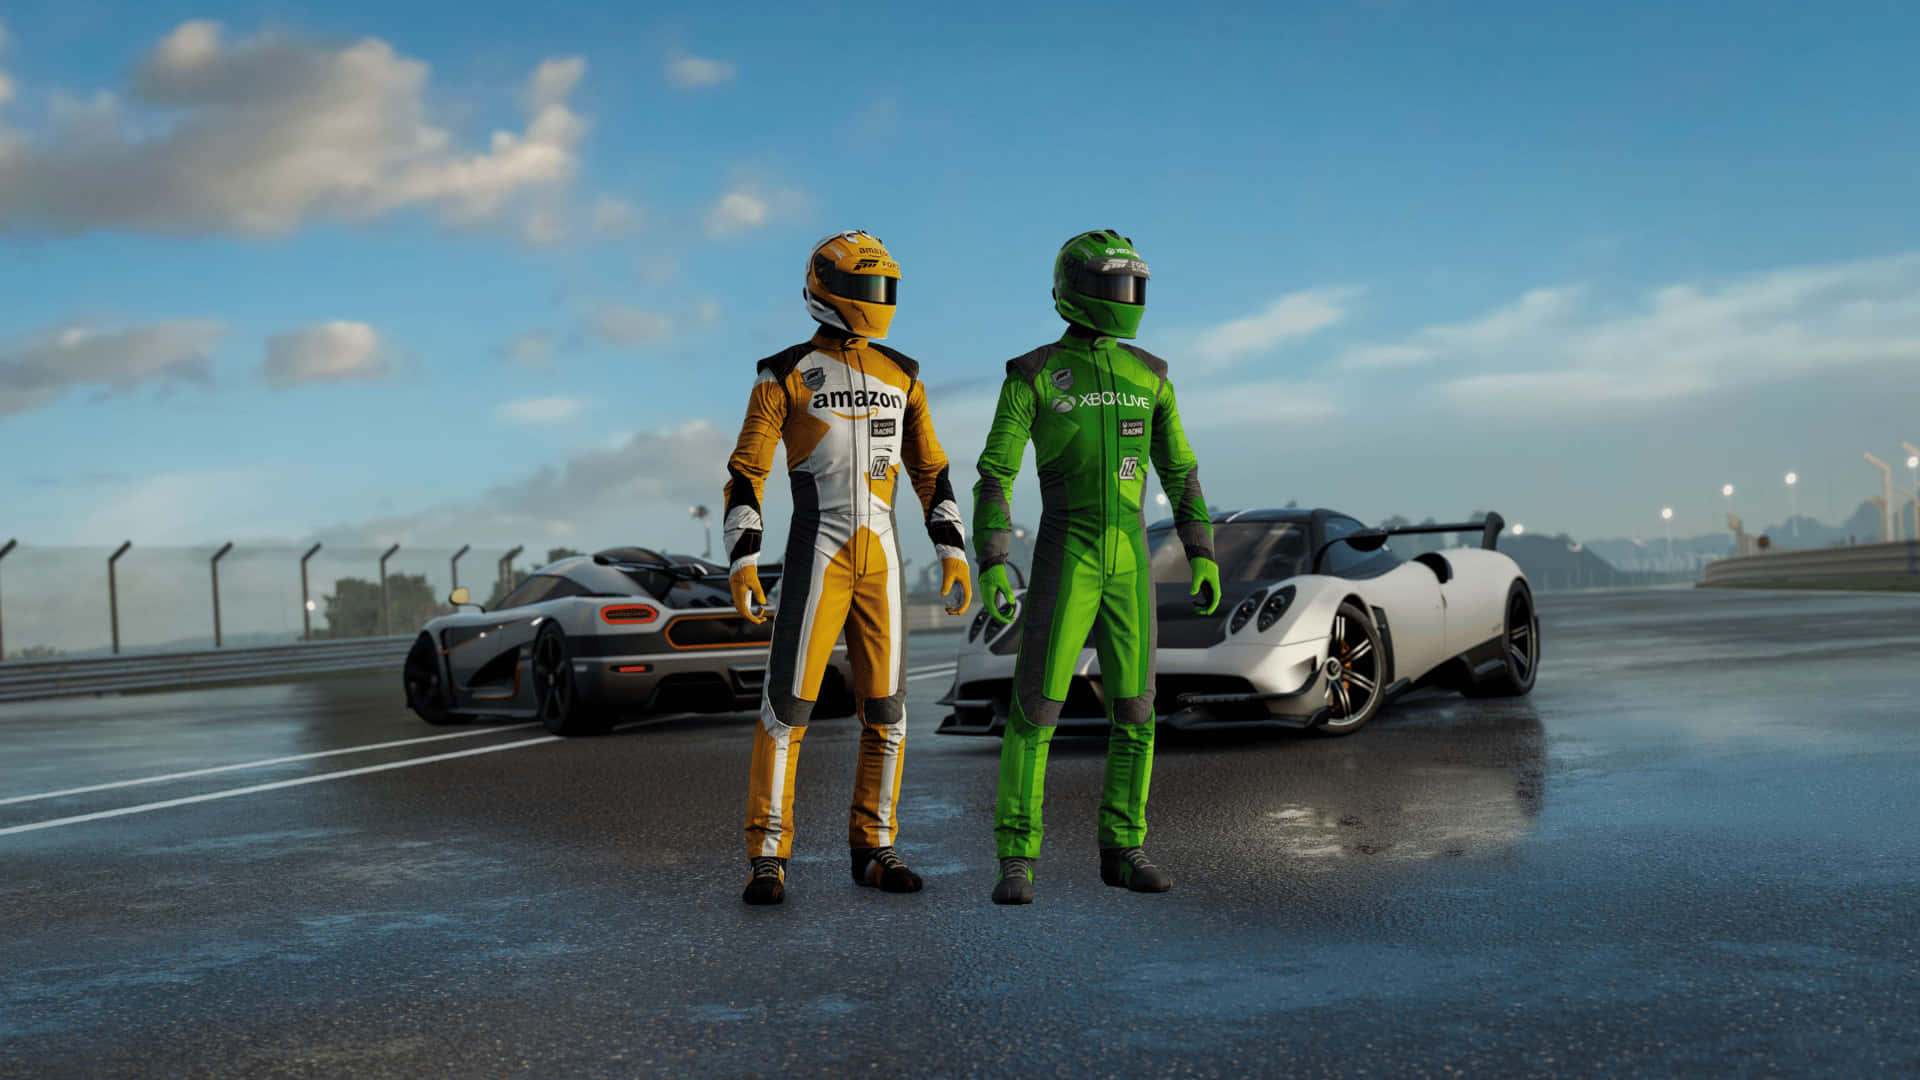 Get Ready for Action in Forza Motorsport 7